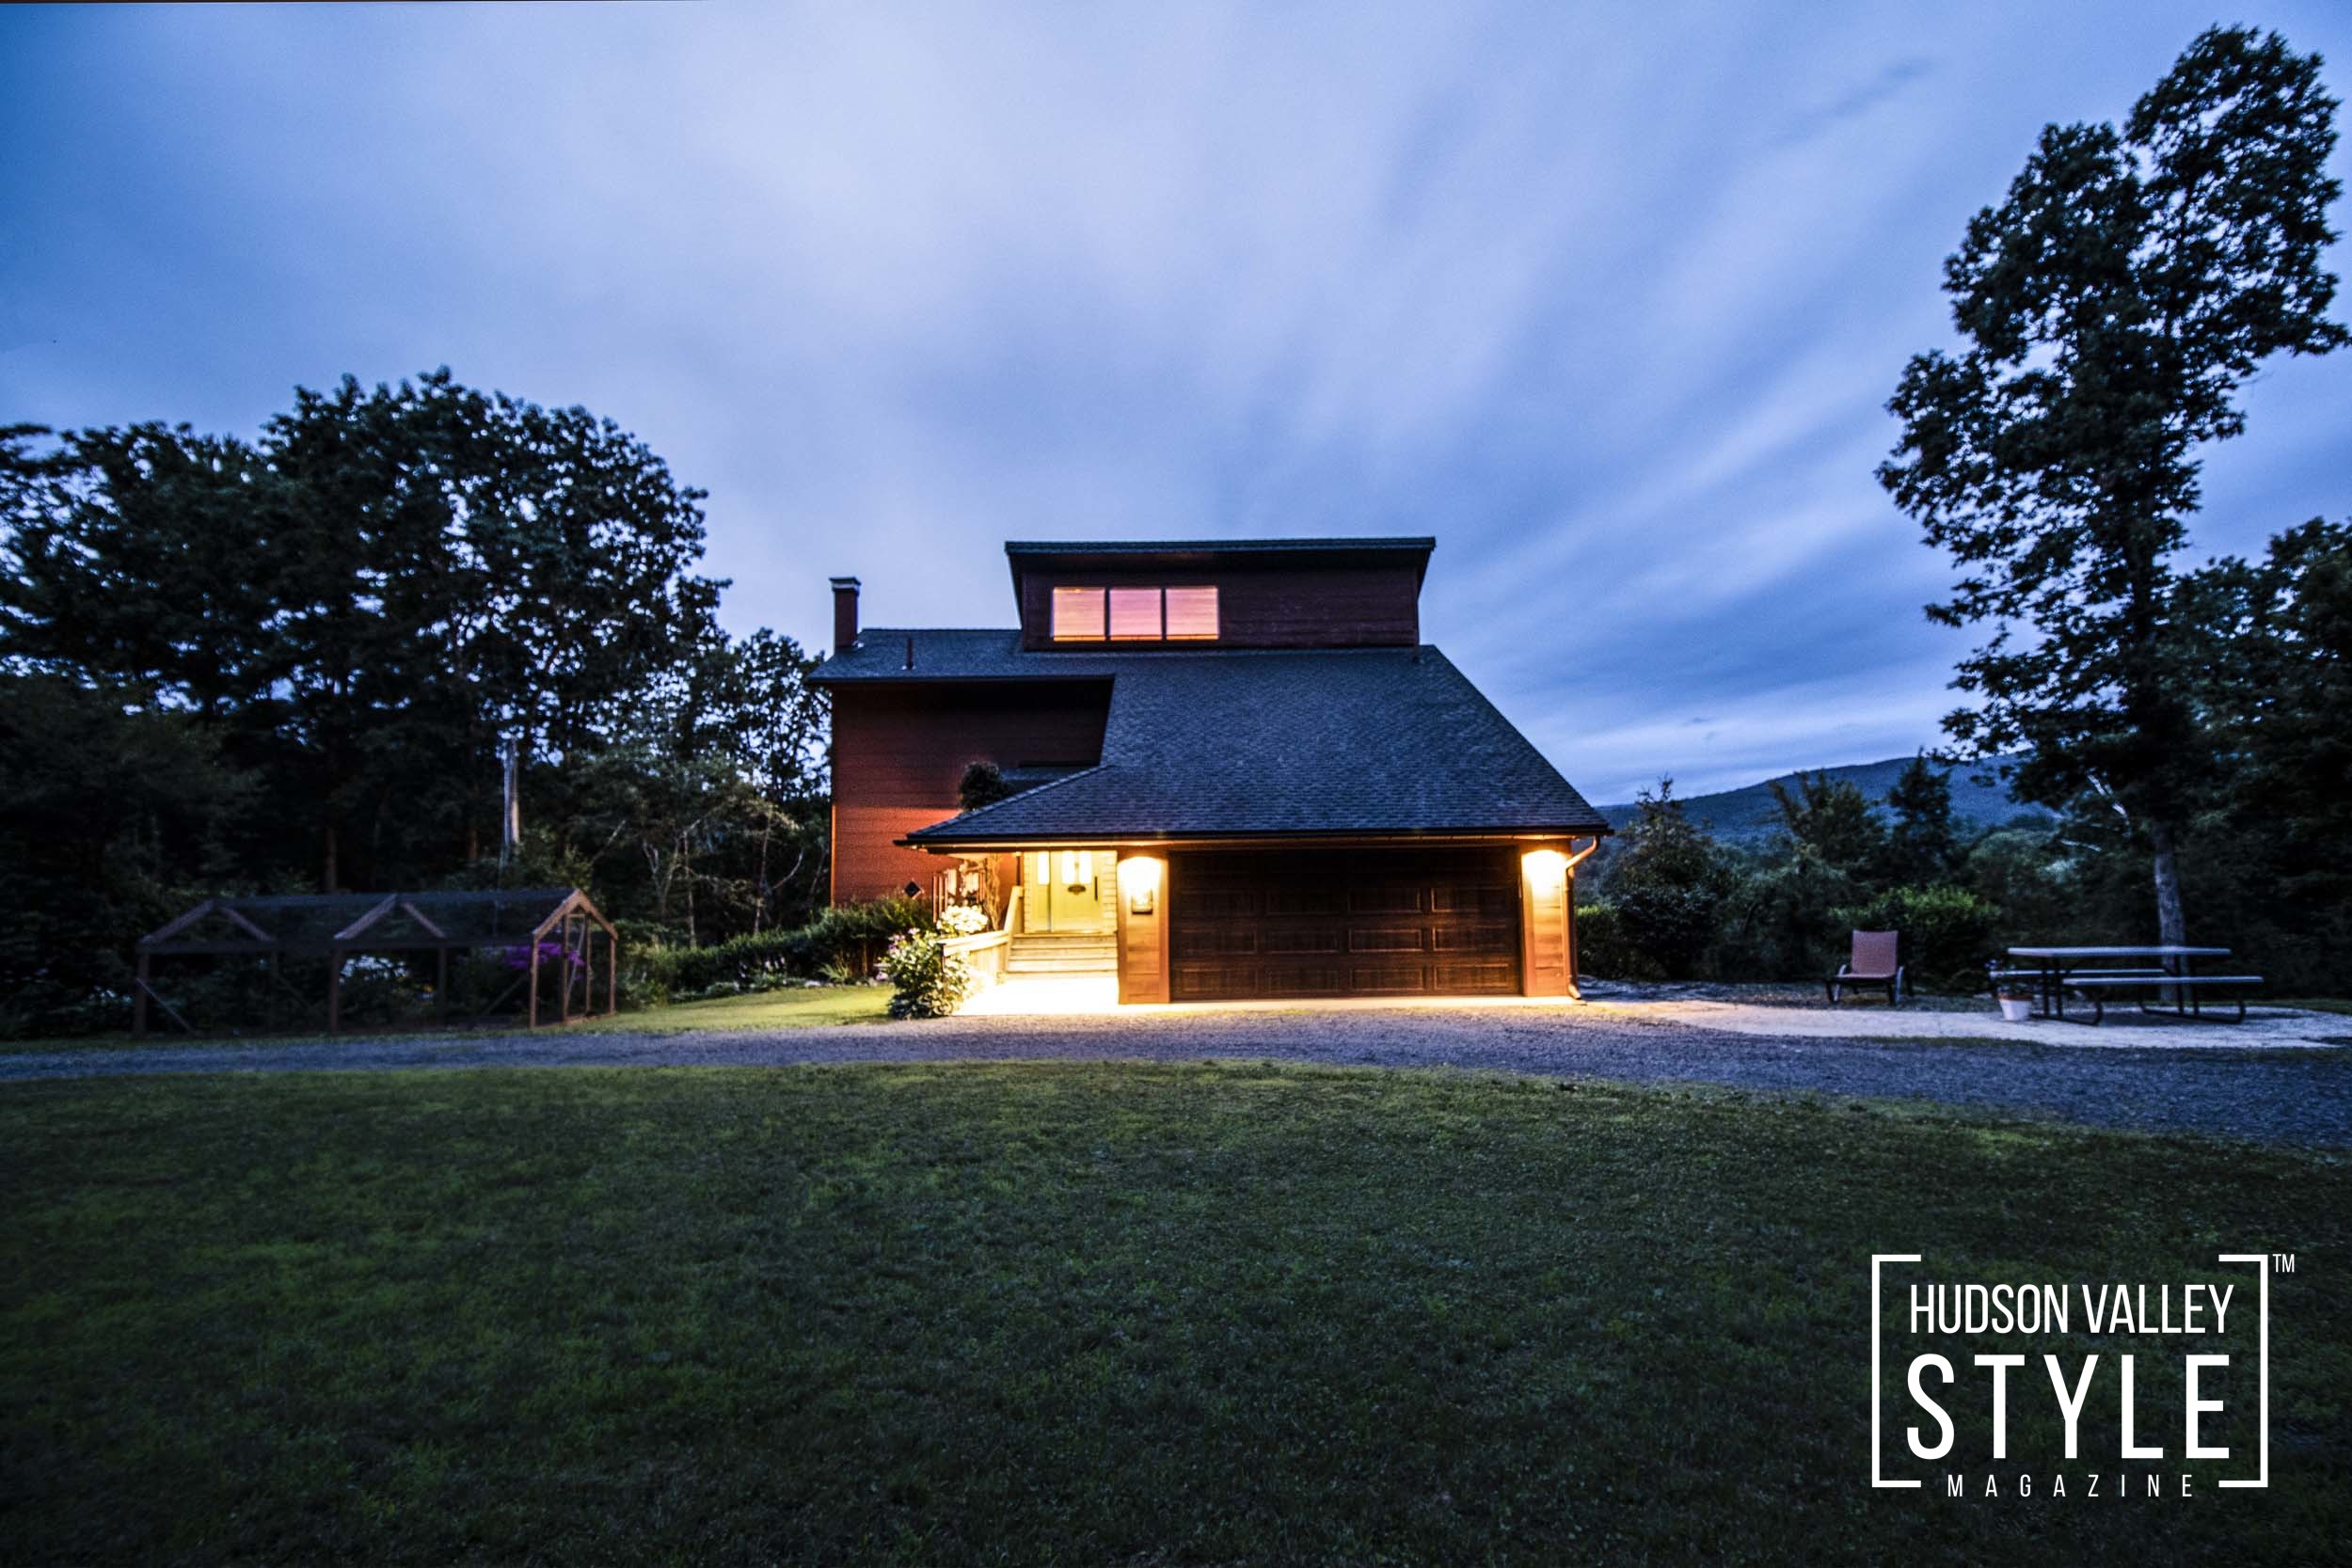 Villa Ashokan - Catskills - Take Me There! Story and Photography by Maxwell Alexander, Editor-in-Chief, Hudson Valley Style Magazine